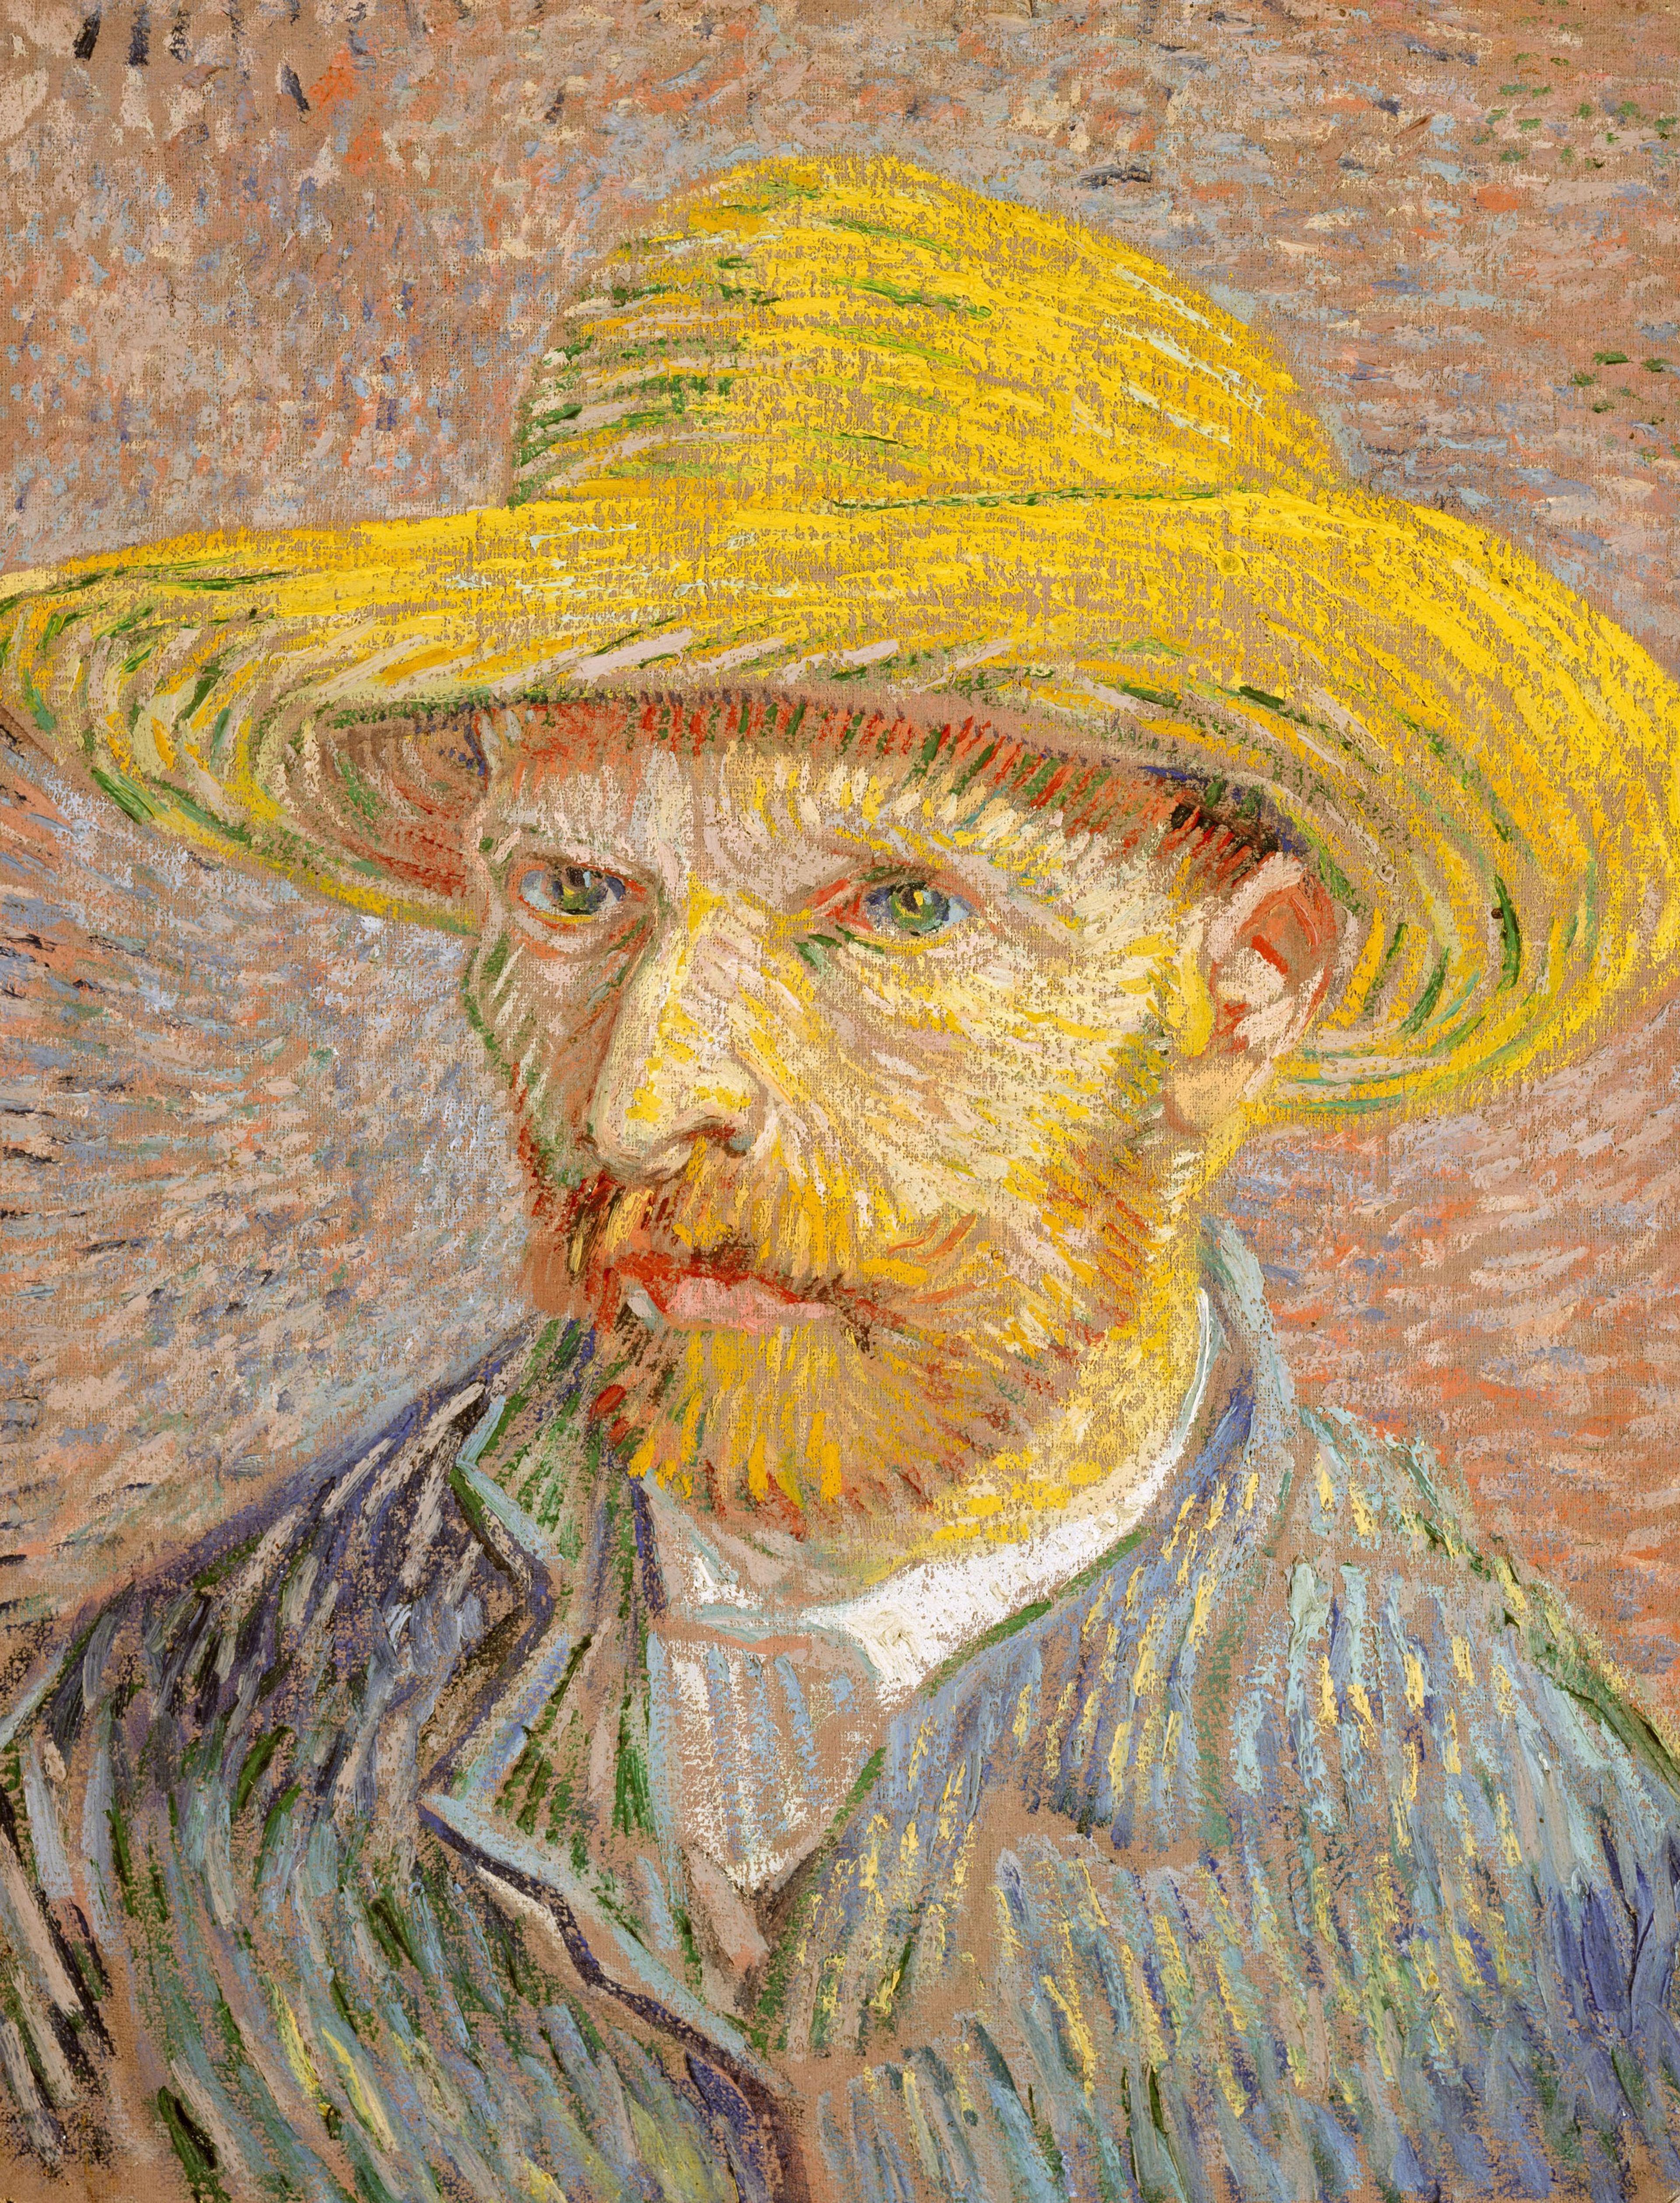 An oil painting featuring a self portrait of Vincent van Gogh wearing a bright yellow straw hat and blue smock.